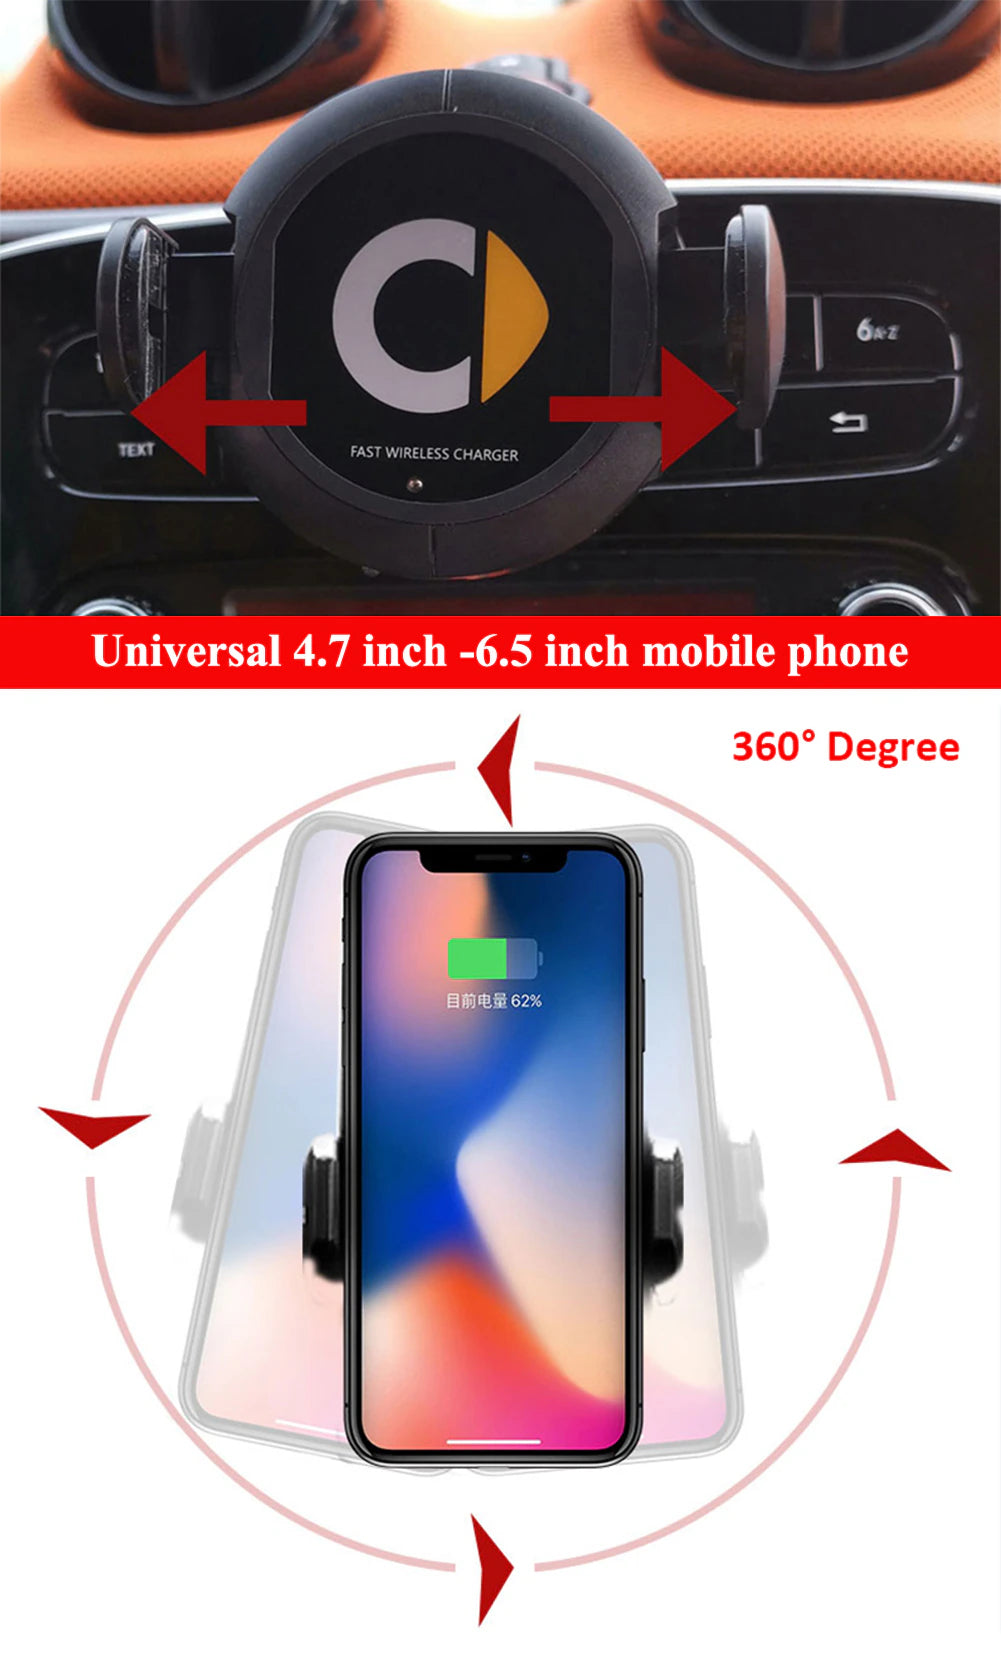 Car Wireless Charging Phone Holder with Navigation Bracket, Phone charger, Smart 453 fortwo/forfour Infrared Sensor for iPhone and Android